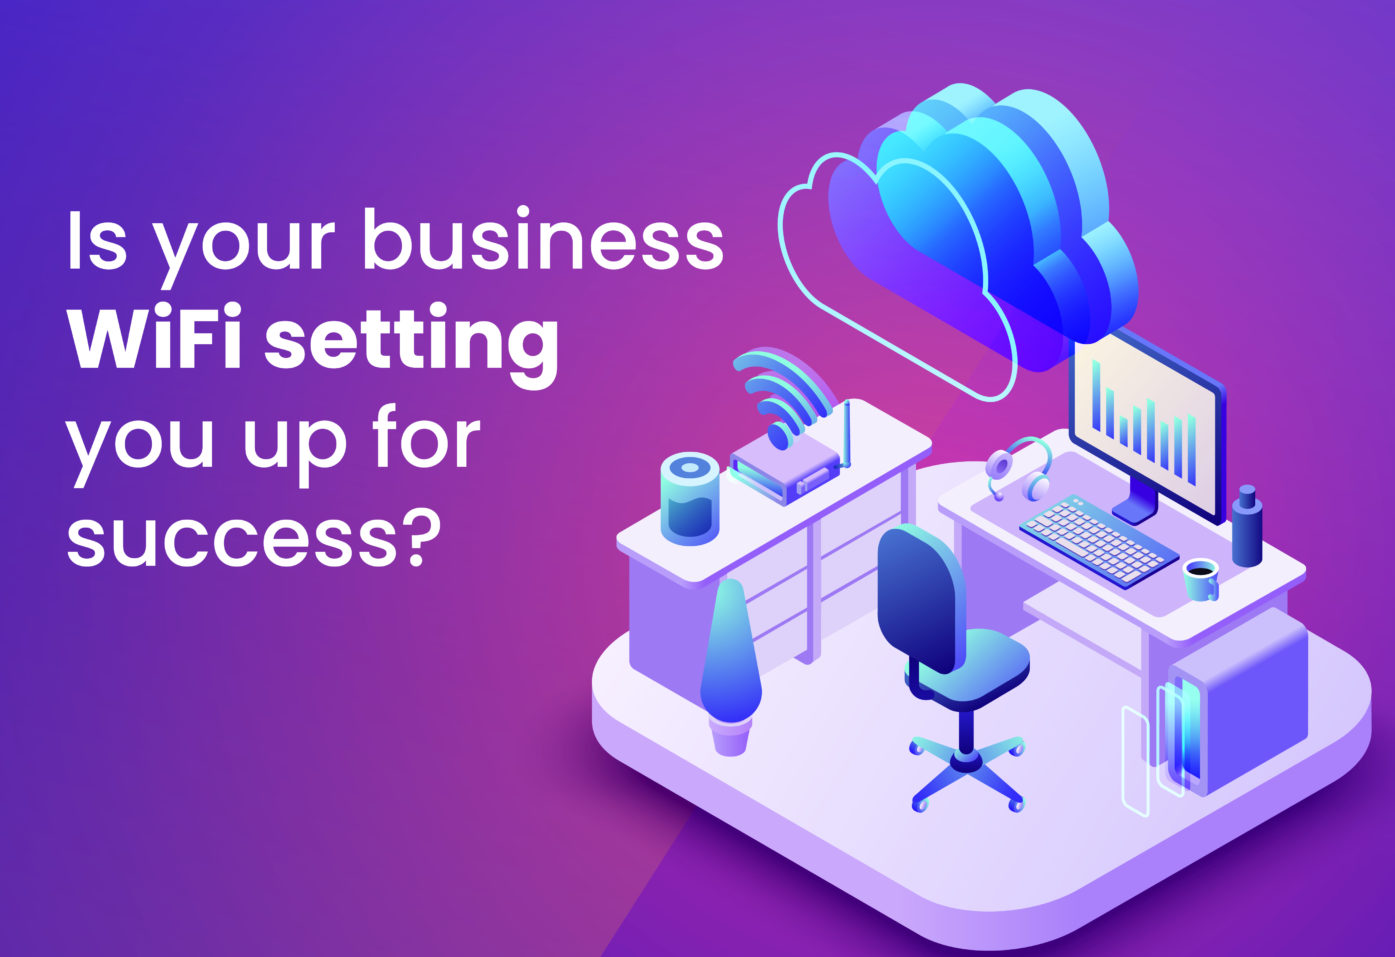 Is your business WiFi setting you up for success?